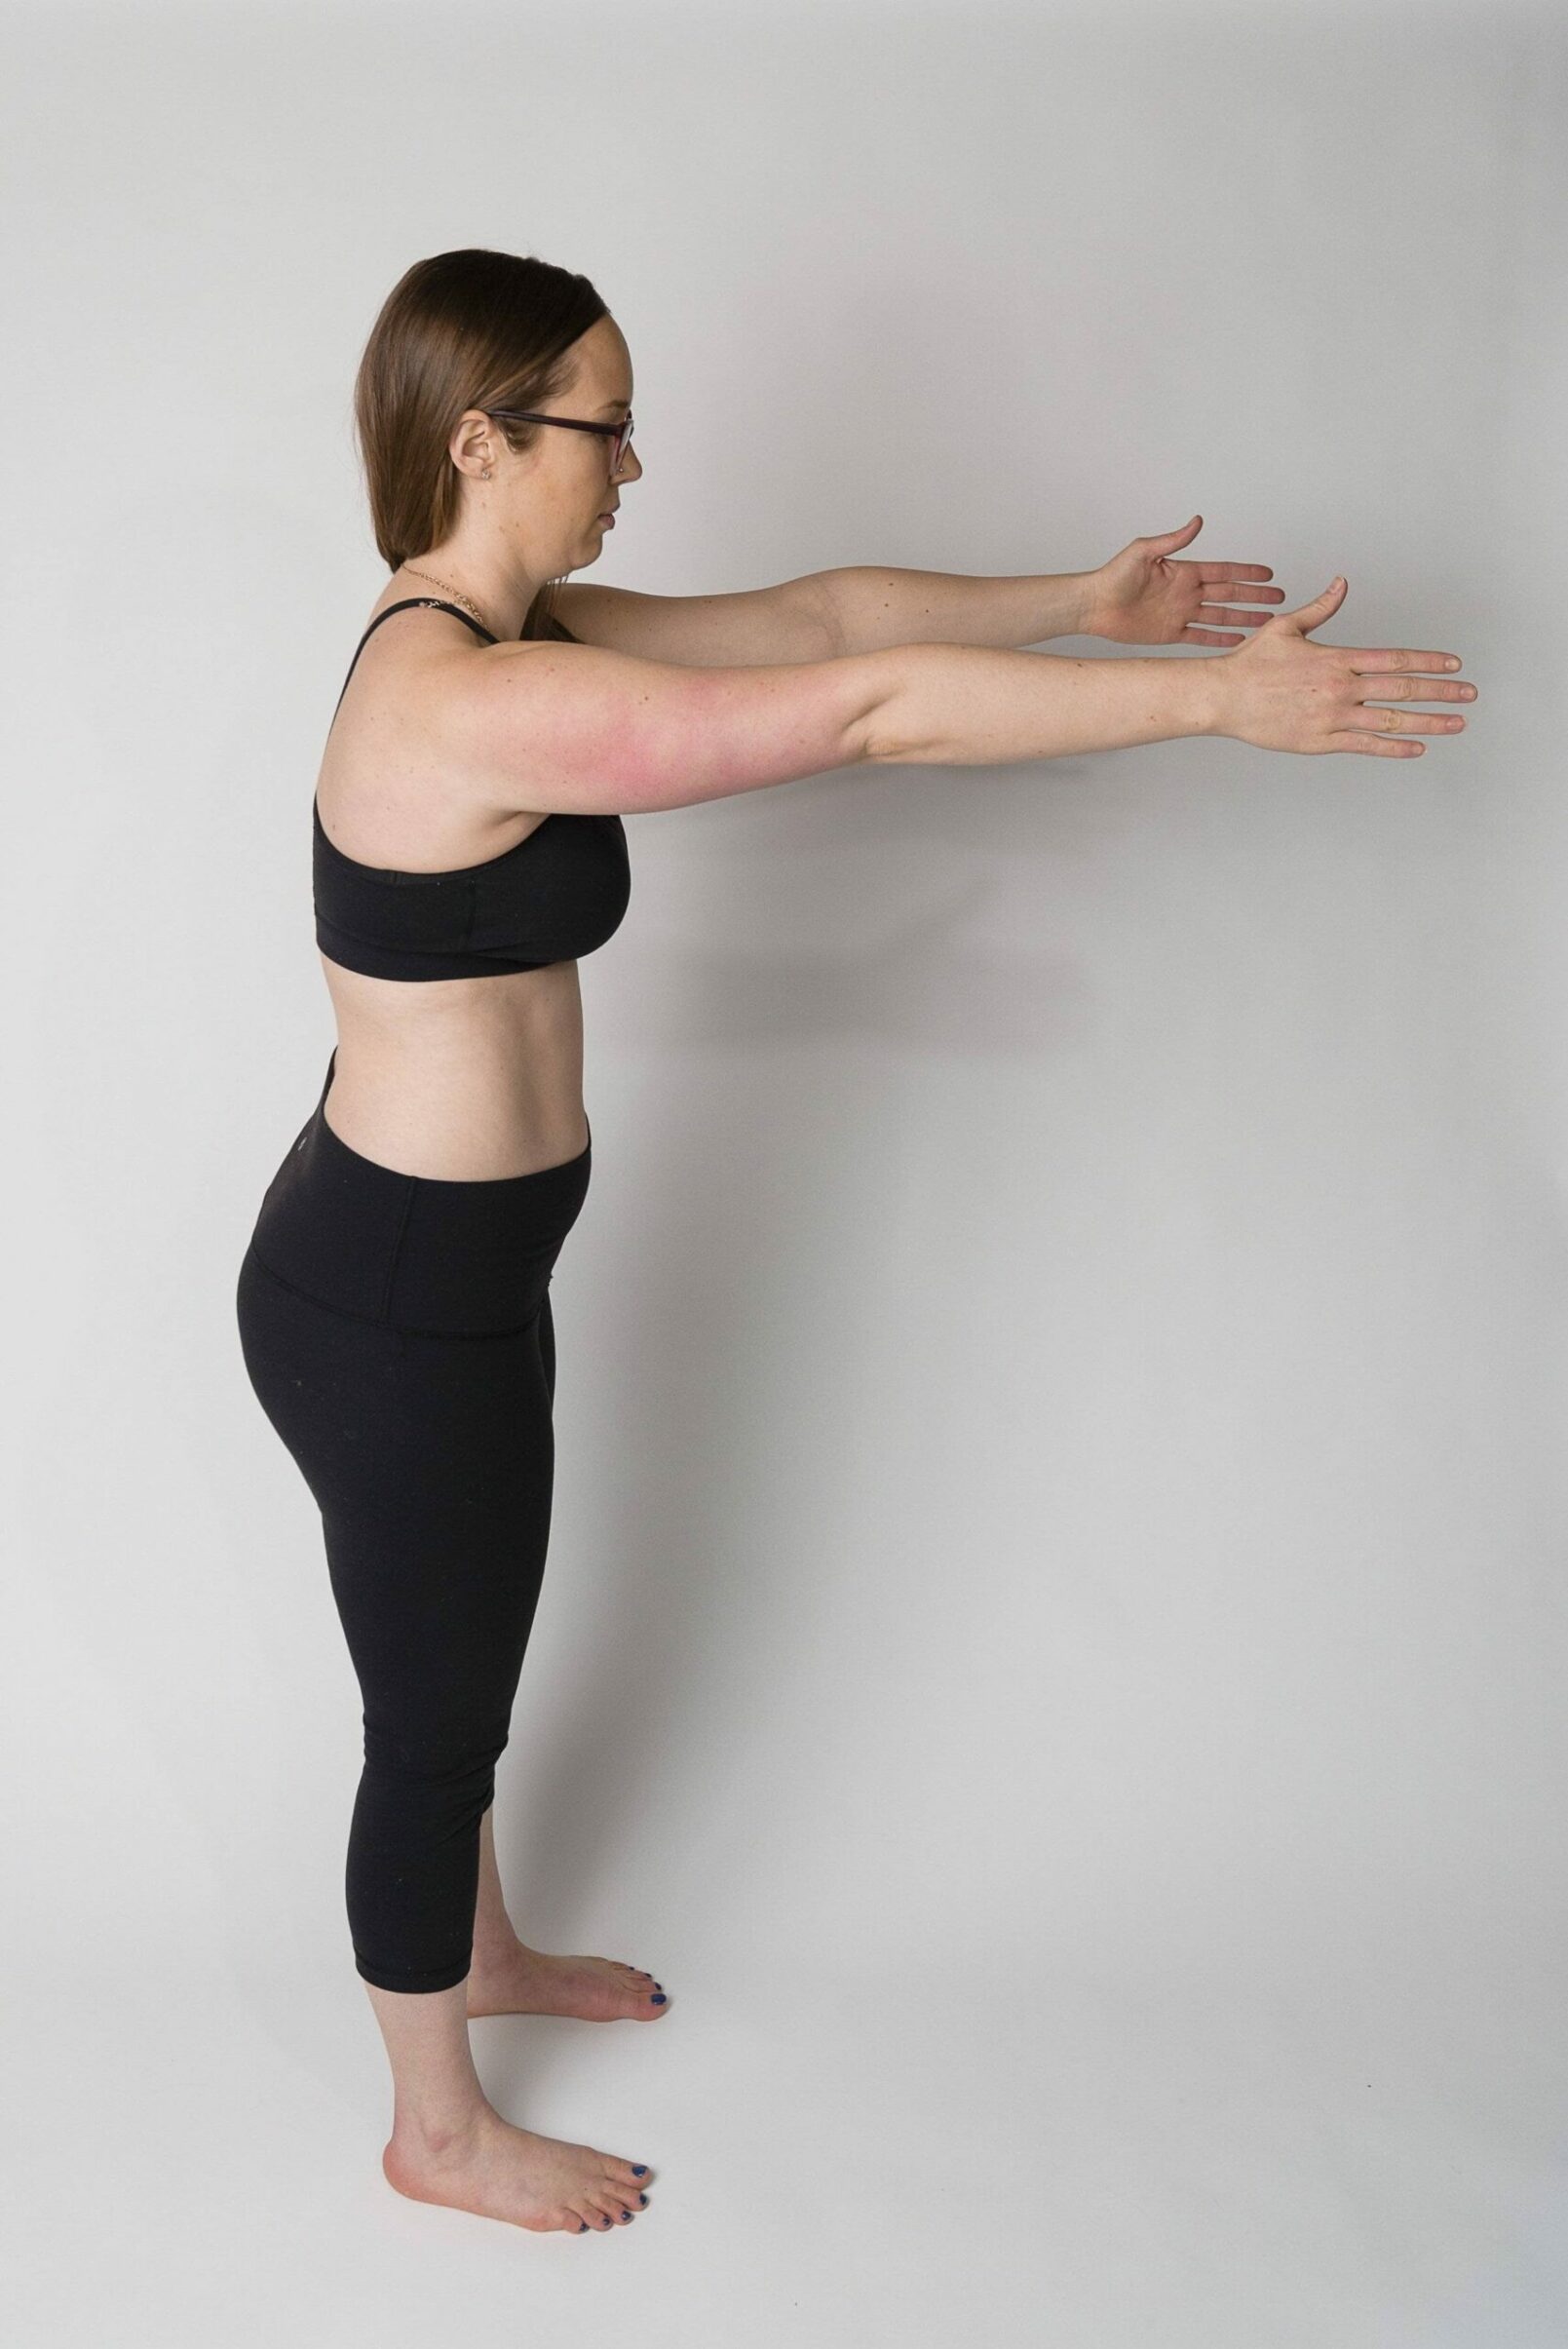 a woman standing facing to the side, with her arms straight out in front of her at shoulder height. She's demonstrating the "ribs over hips" body position for exercising after c-section.